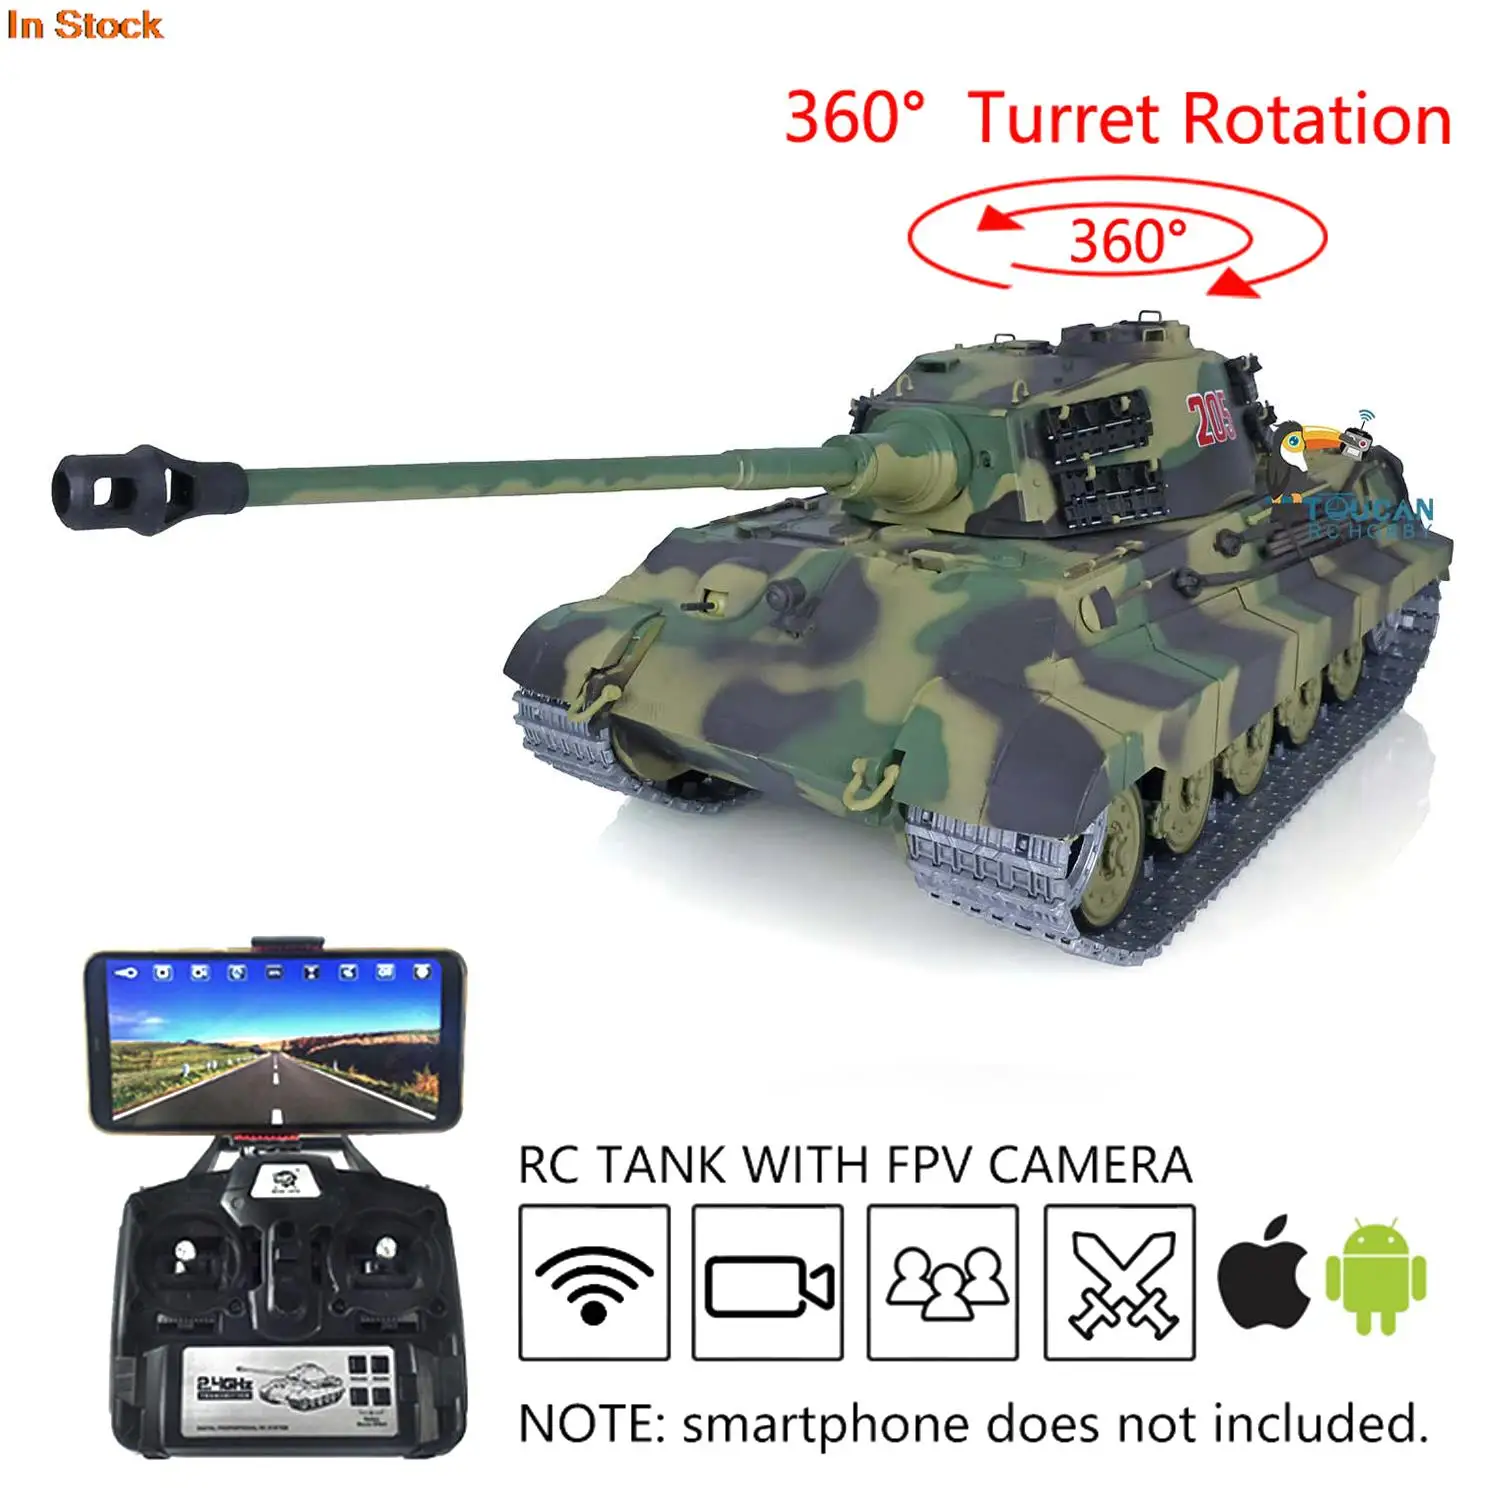 

Gifts 1/16 7.0 HENG LONG Upgraded Ver FPV German King Tiger RTR RC Tank Toucan Controlled Toys 3888A 360�� Turret TH17527-SMT8